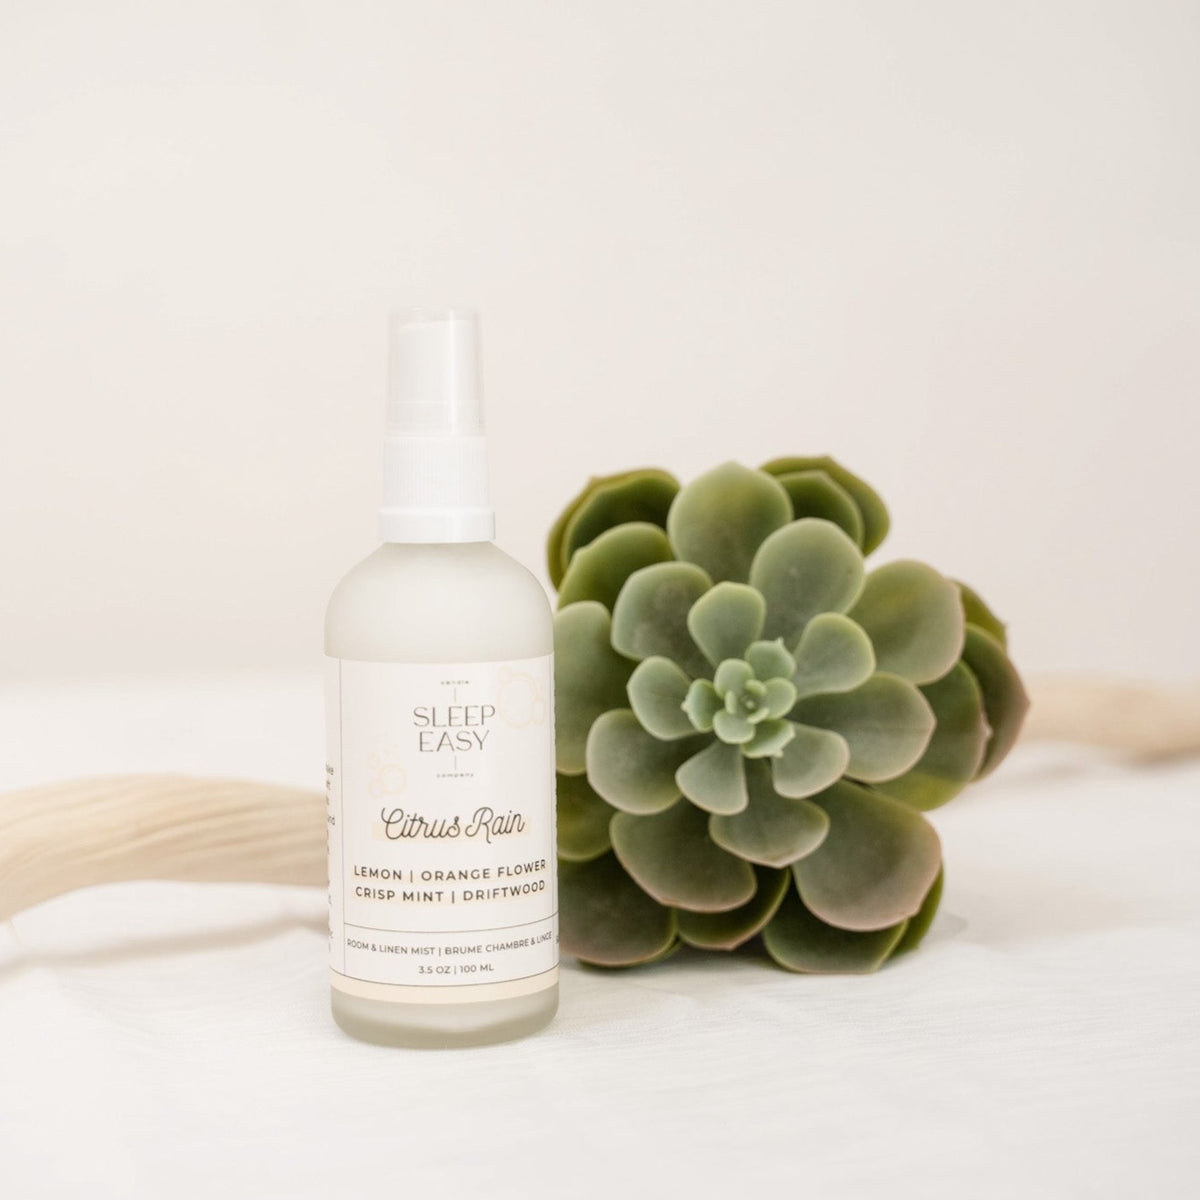 Citrus rain room spray is displayed in front of a green succulent and dirftwood. room spray, linen mist, home fragrance, air freshener